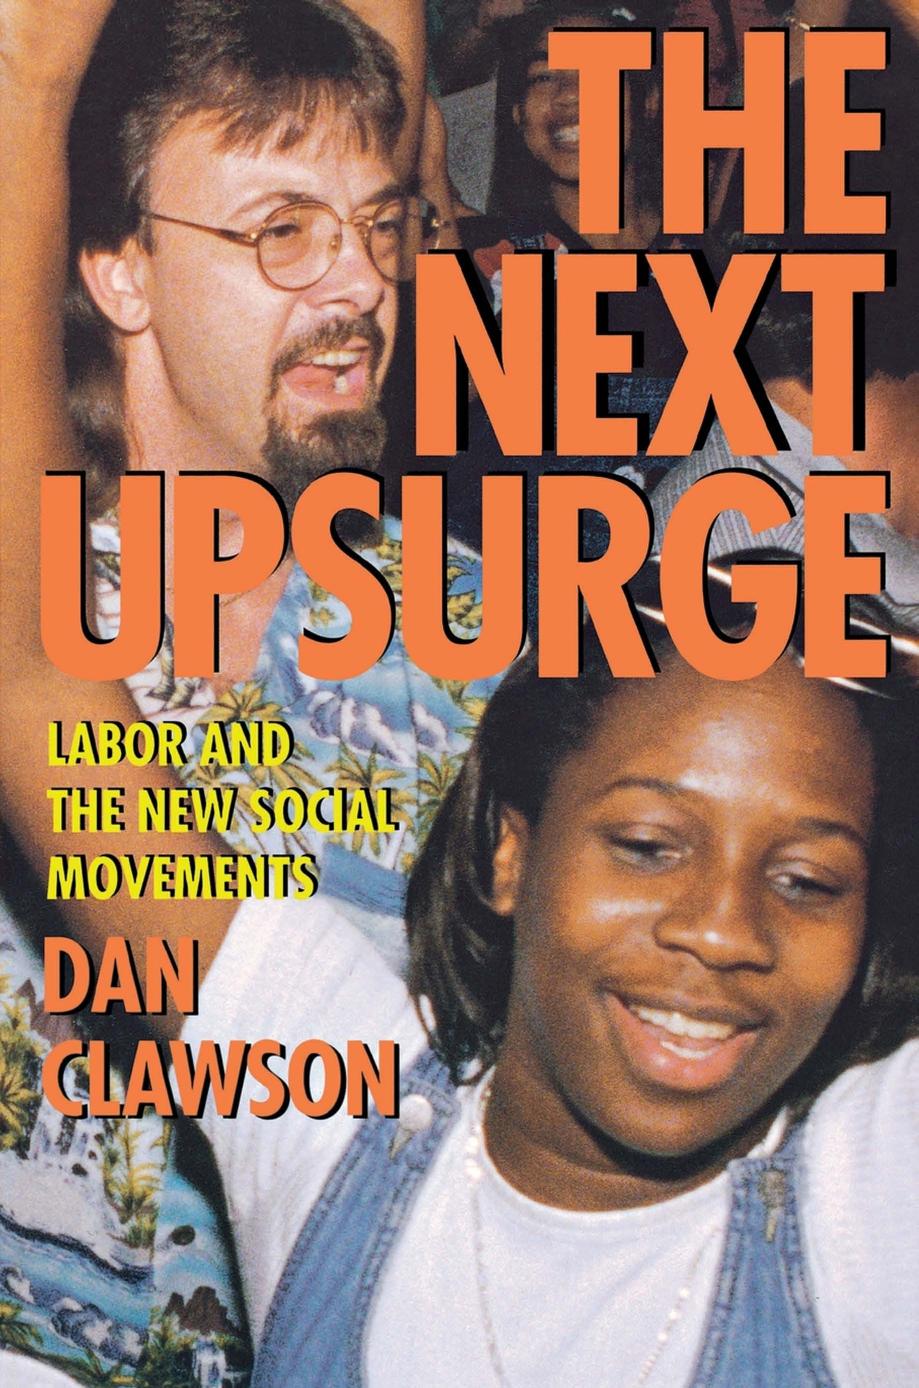 The Next Upsurge: Labor and the New Social Movements by Dan Clawson